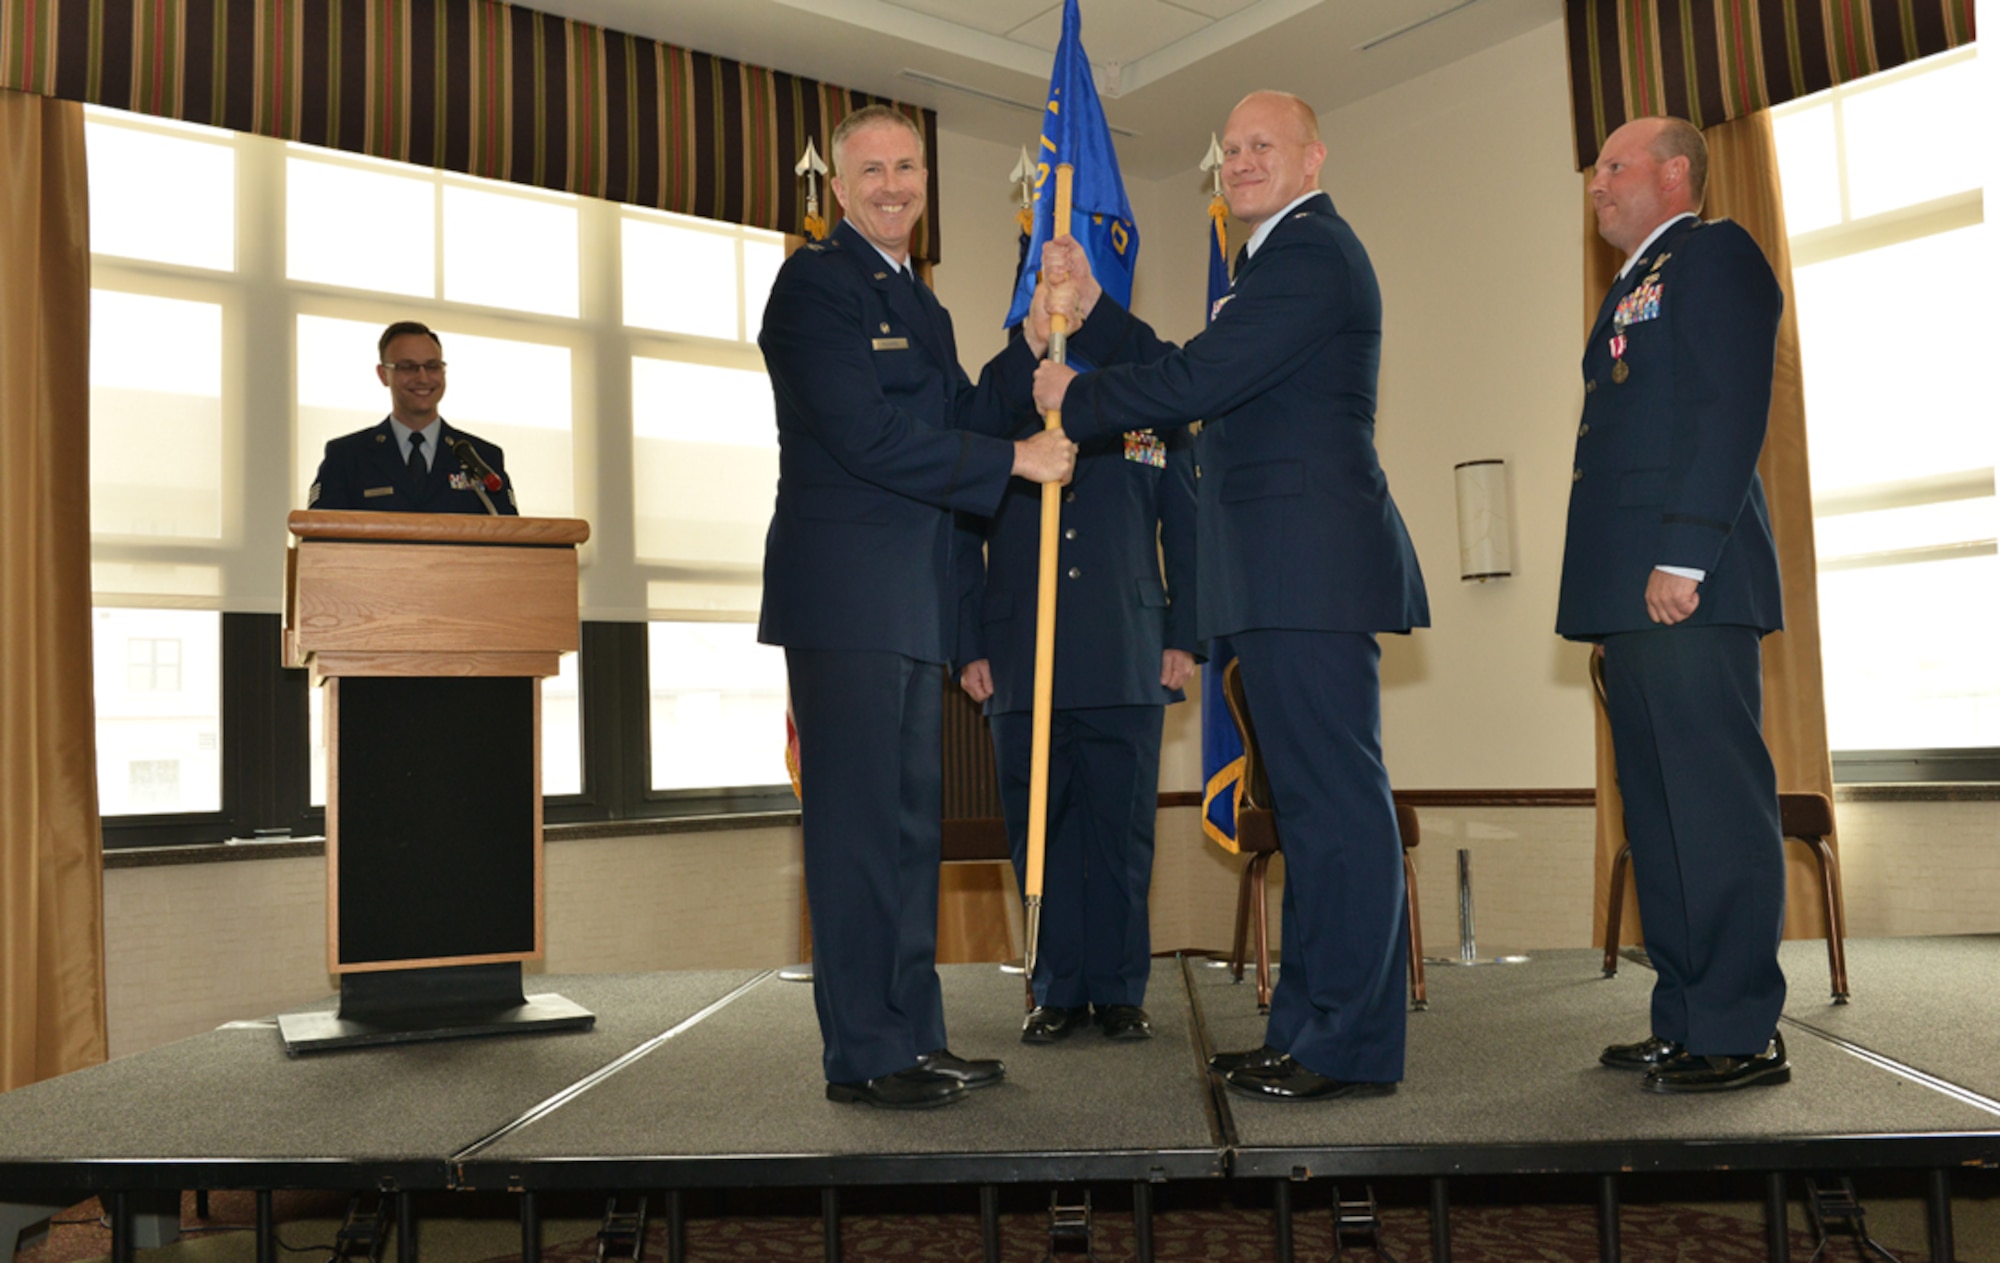 107th AW Commander Col. Robert G. Kilgore presents the 107th AW Operations Group flag to new commander, Lt. Col. Gary R. Charlton II, during a change of command ceremony at the Niagara Falls Air Reserve Station, May 16, 2015. 